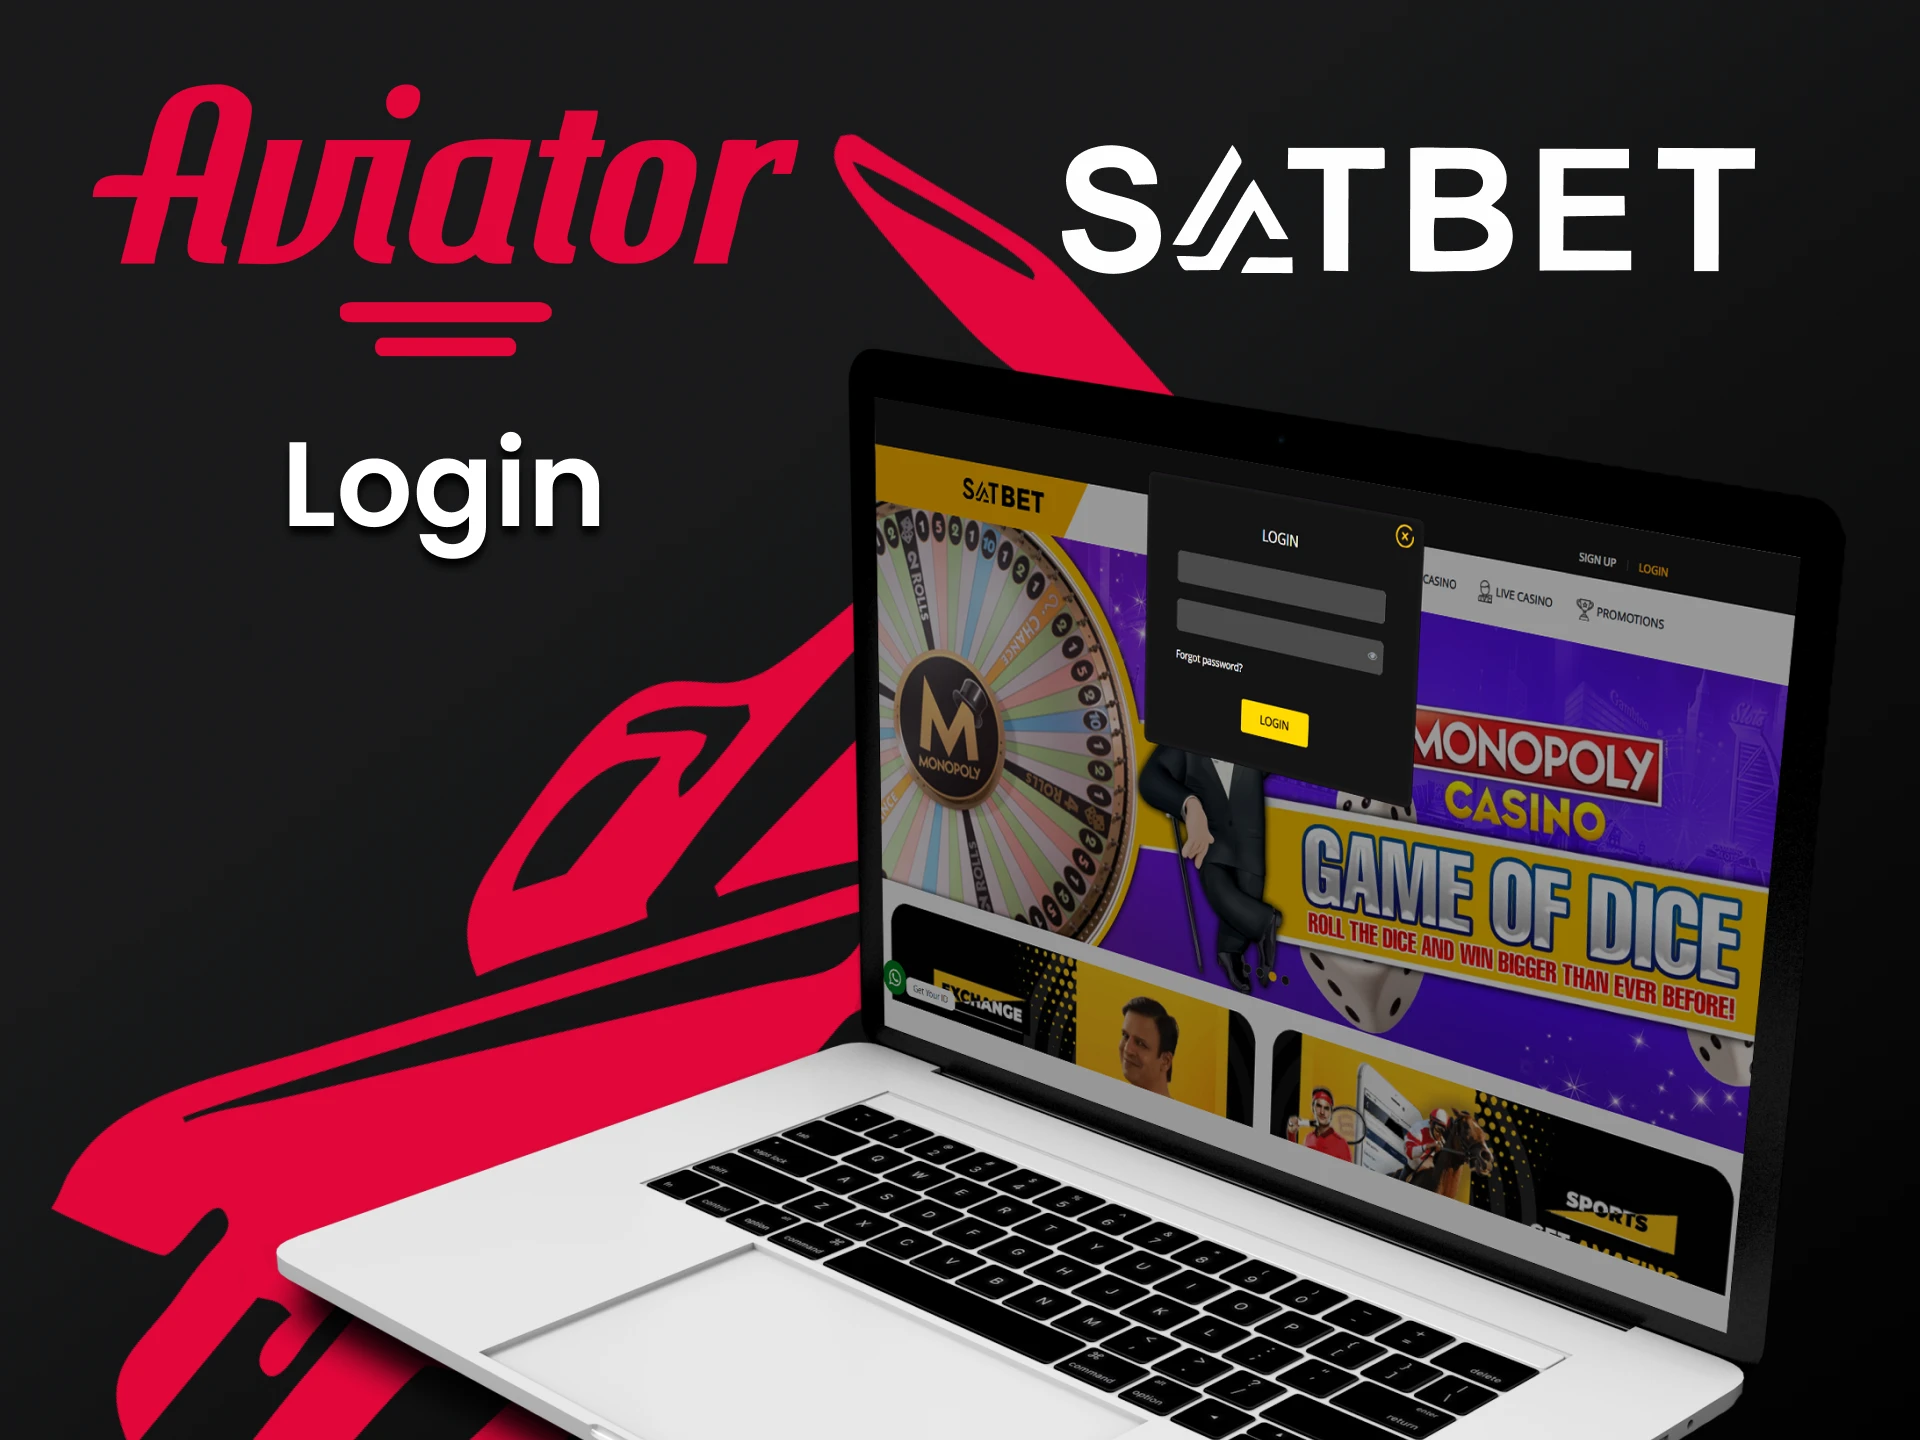 Login to your Satbet account to play Aviator.